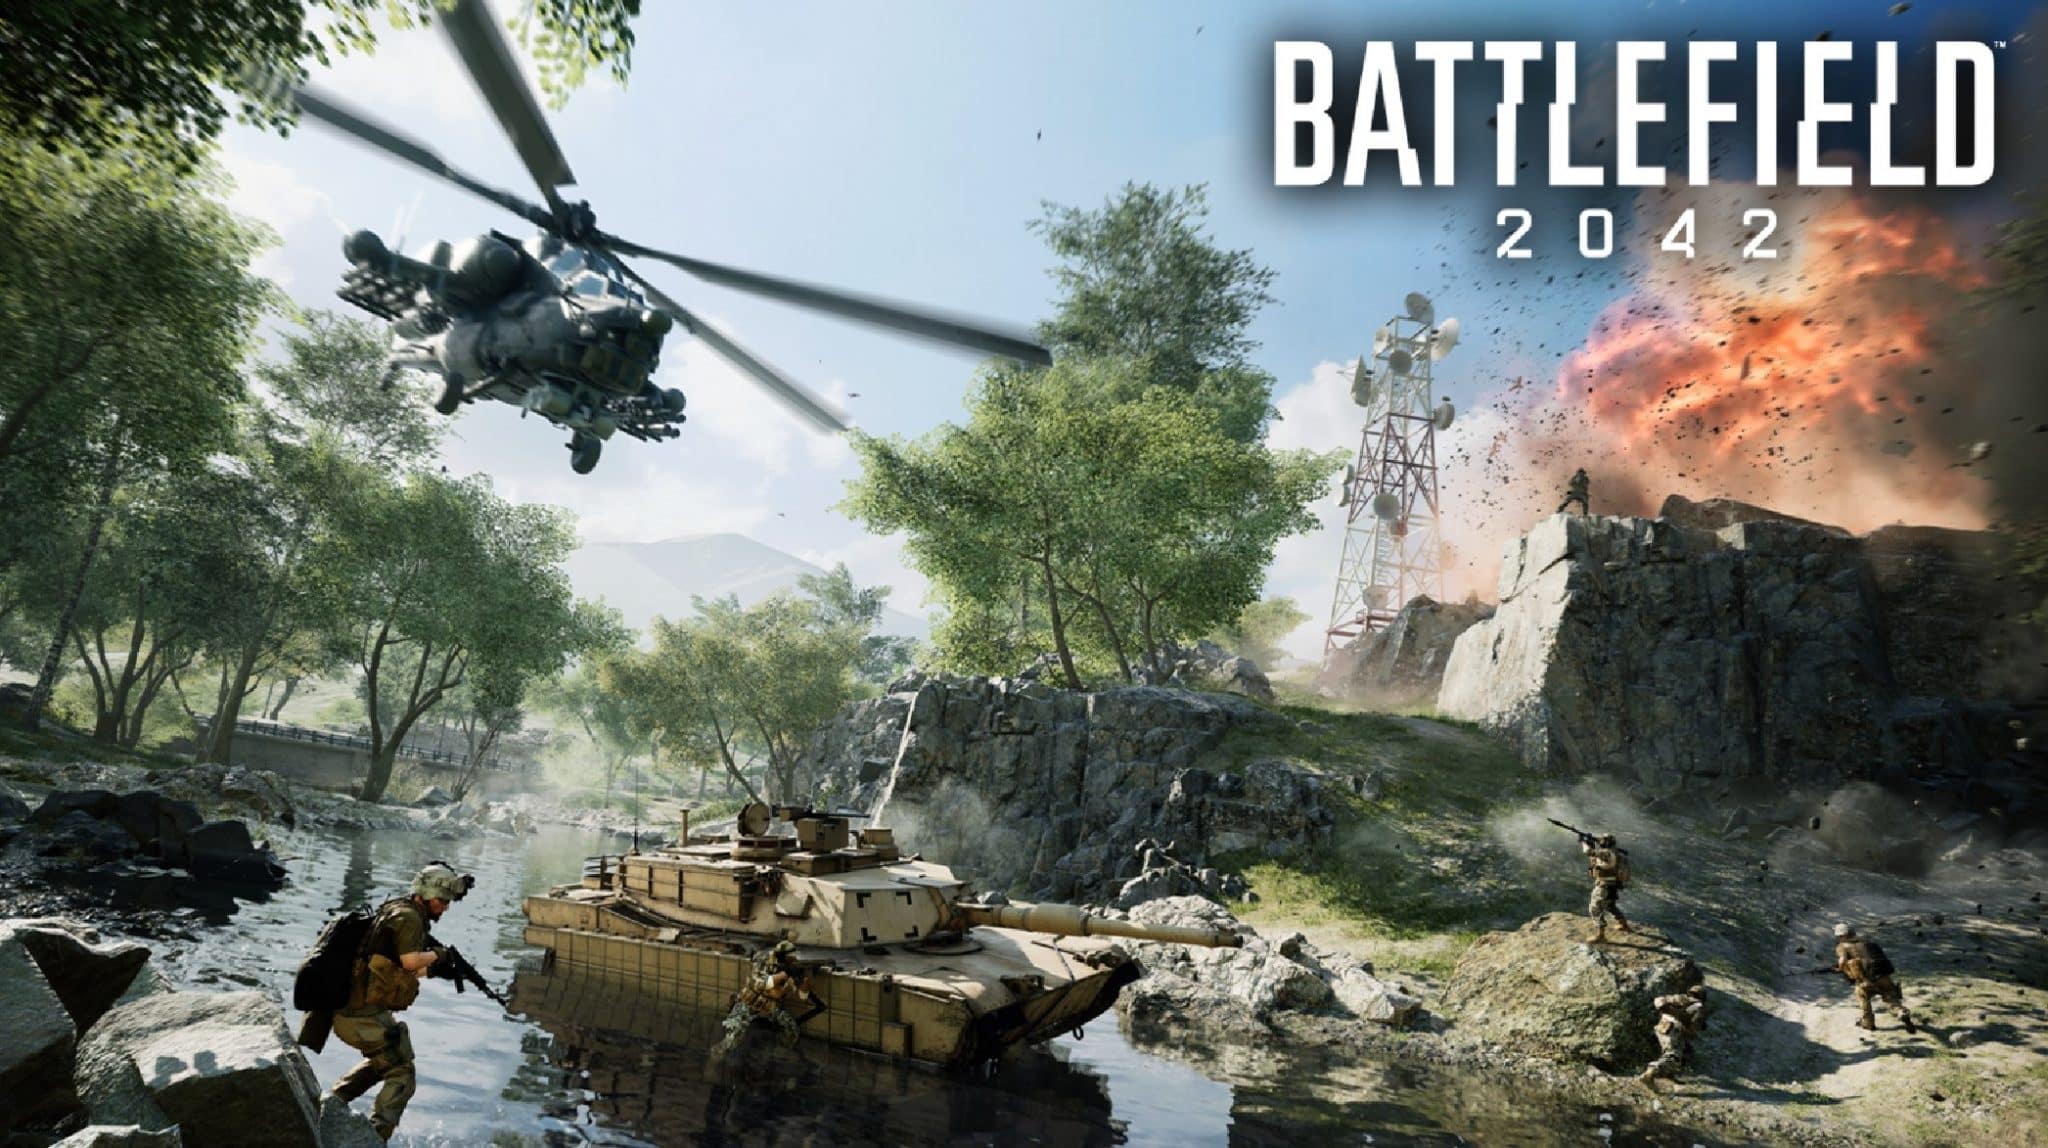 Battlefield 2042 launches with Mostly Negative Reviews on Steam